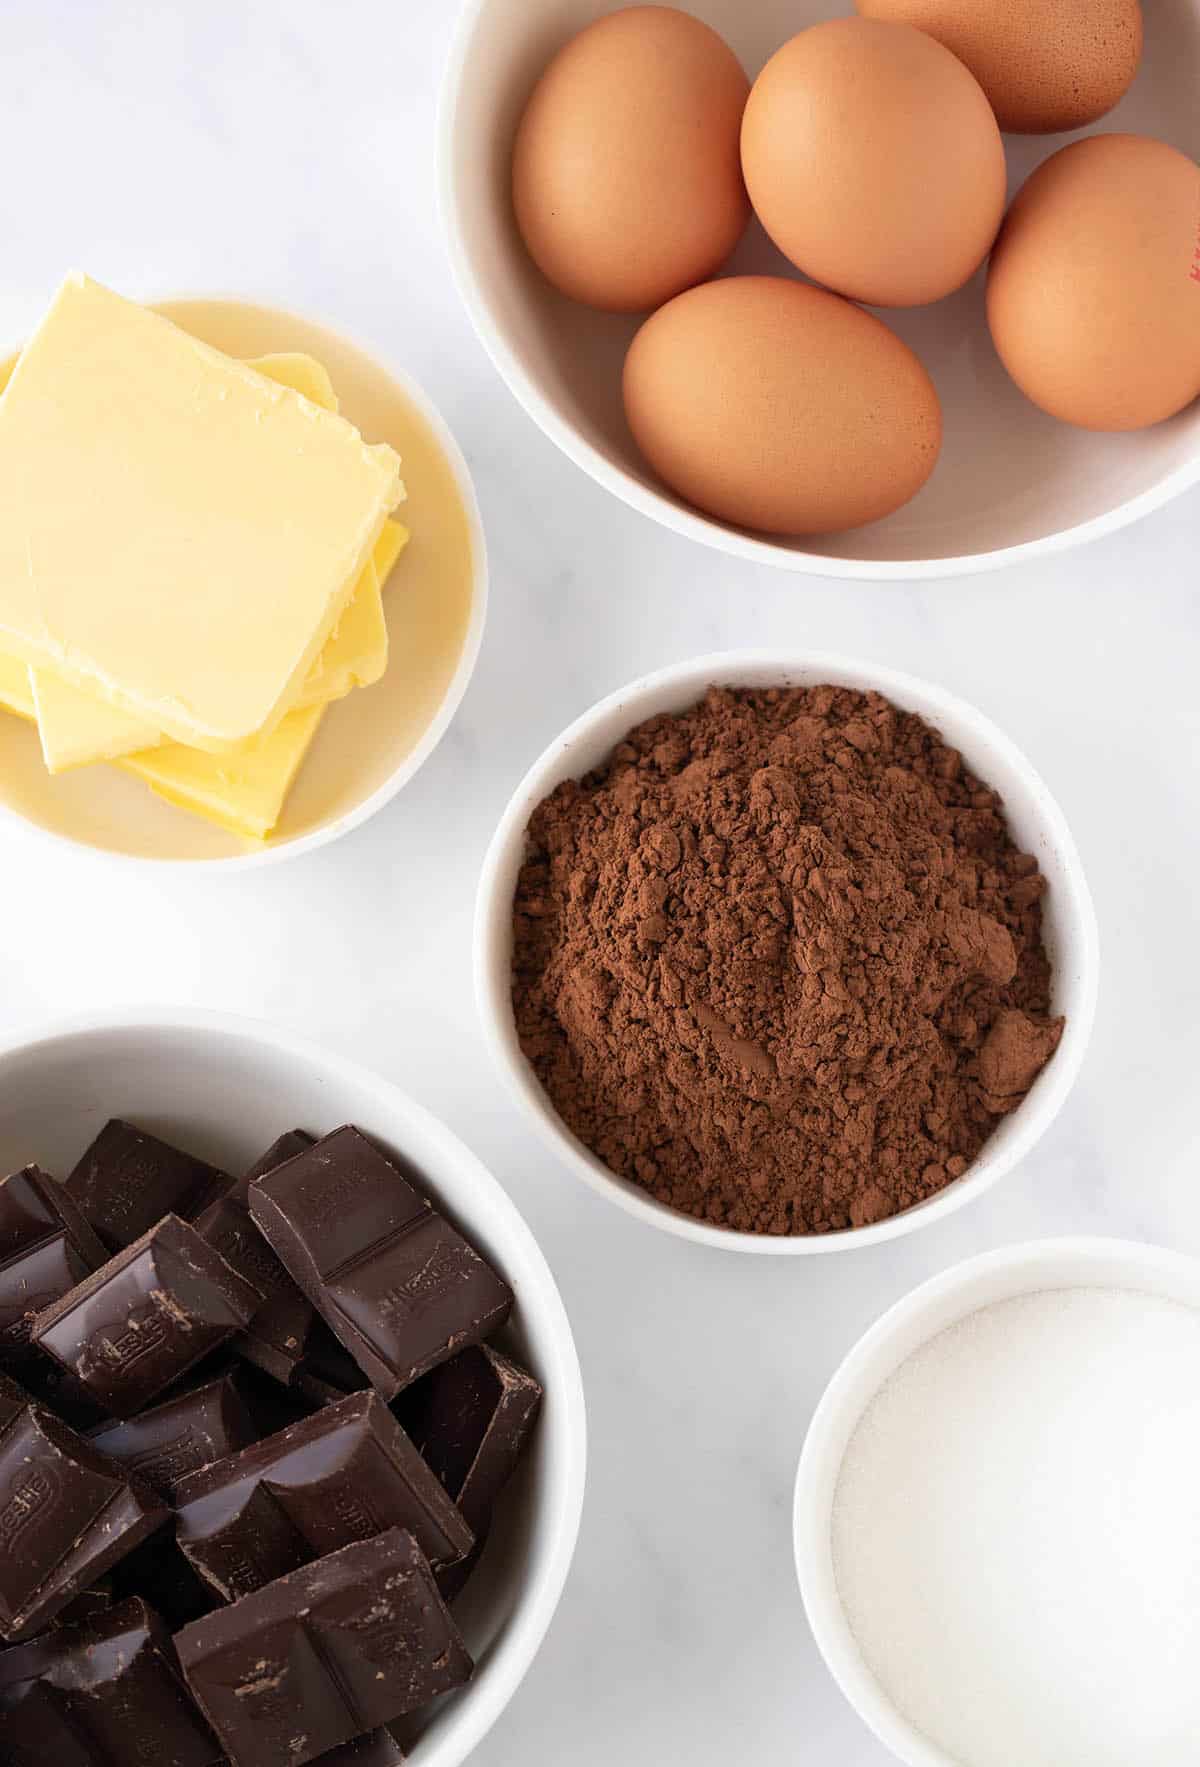 All the ingredients needed for Flourless Chocolate Cake laid out ready to bake.